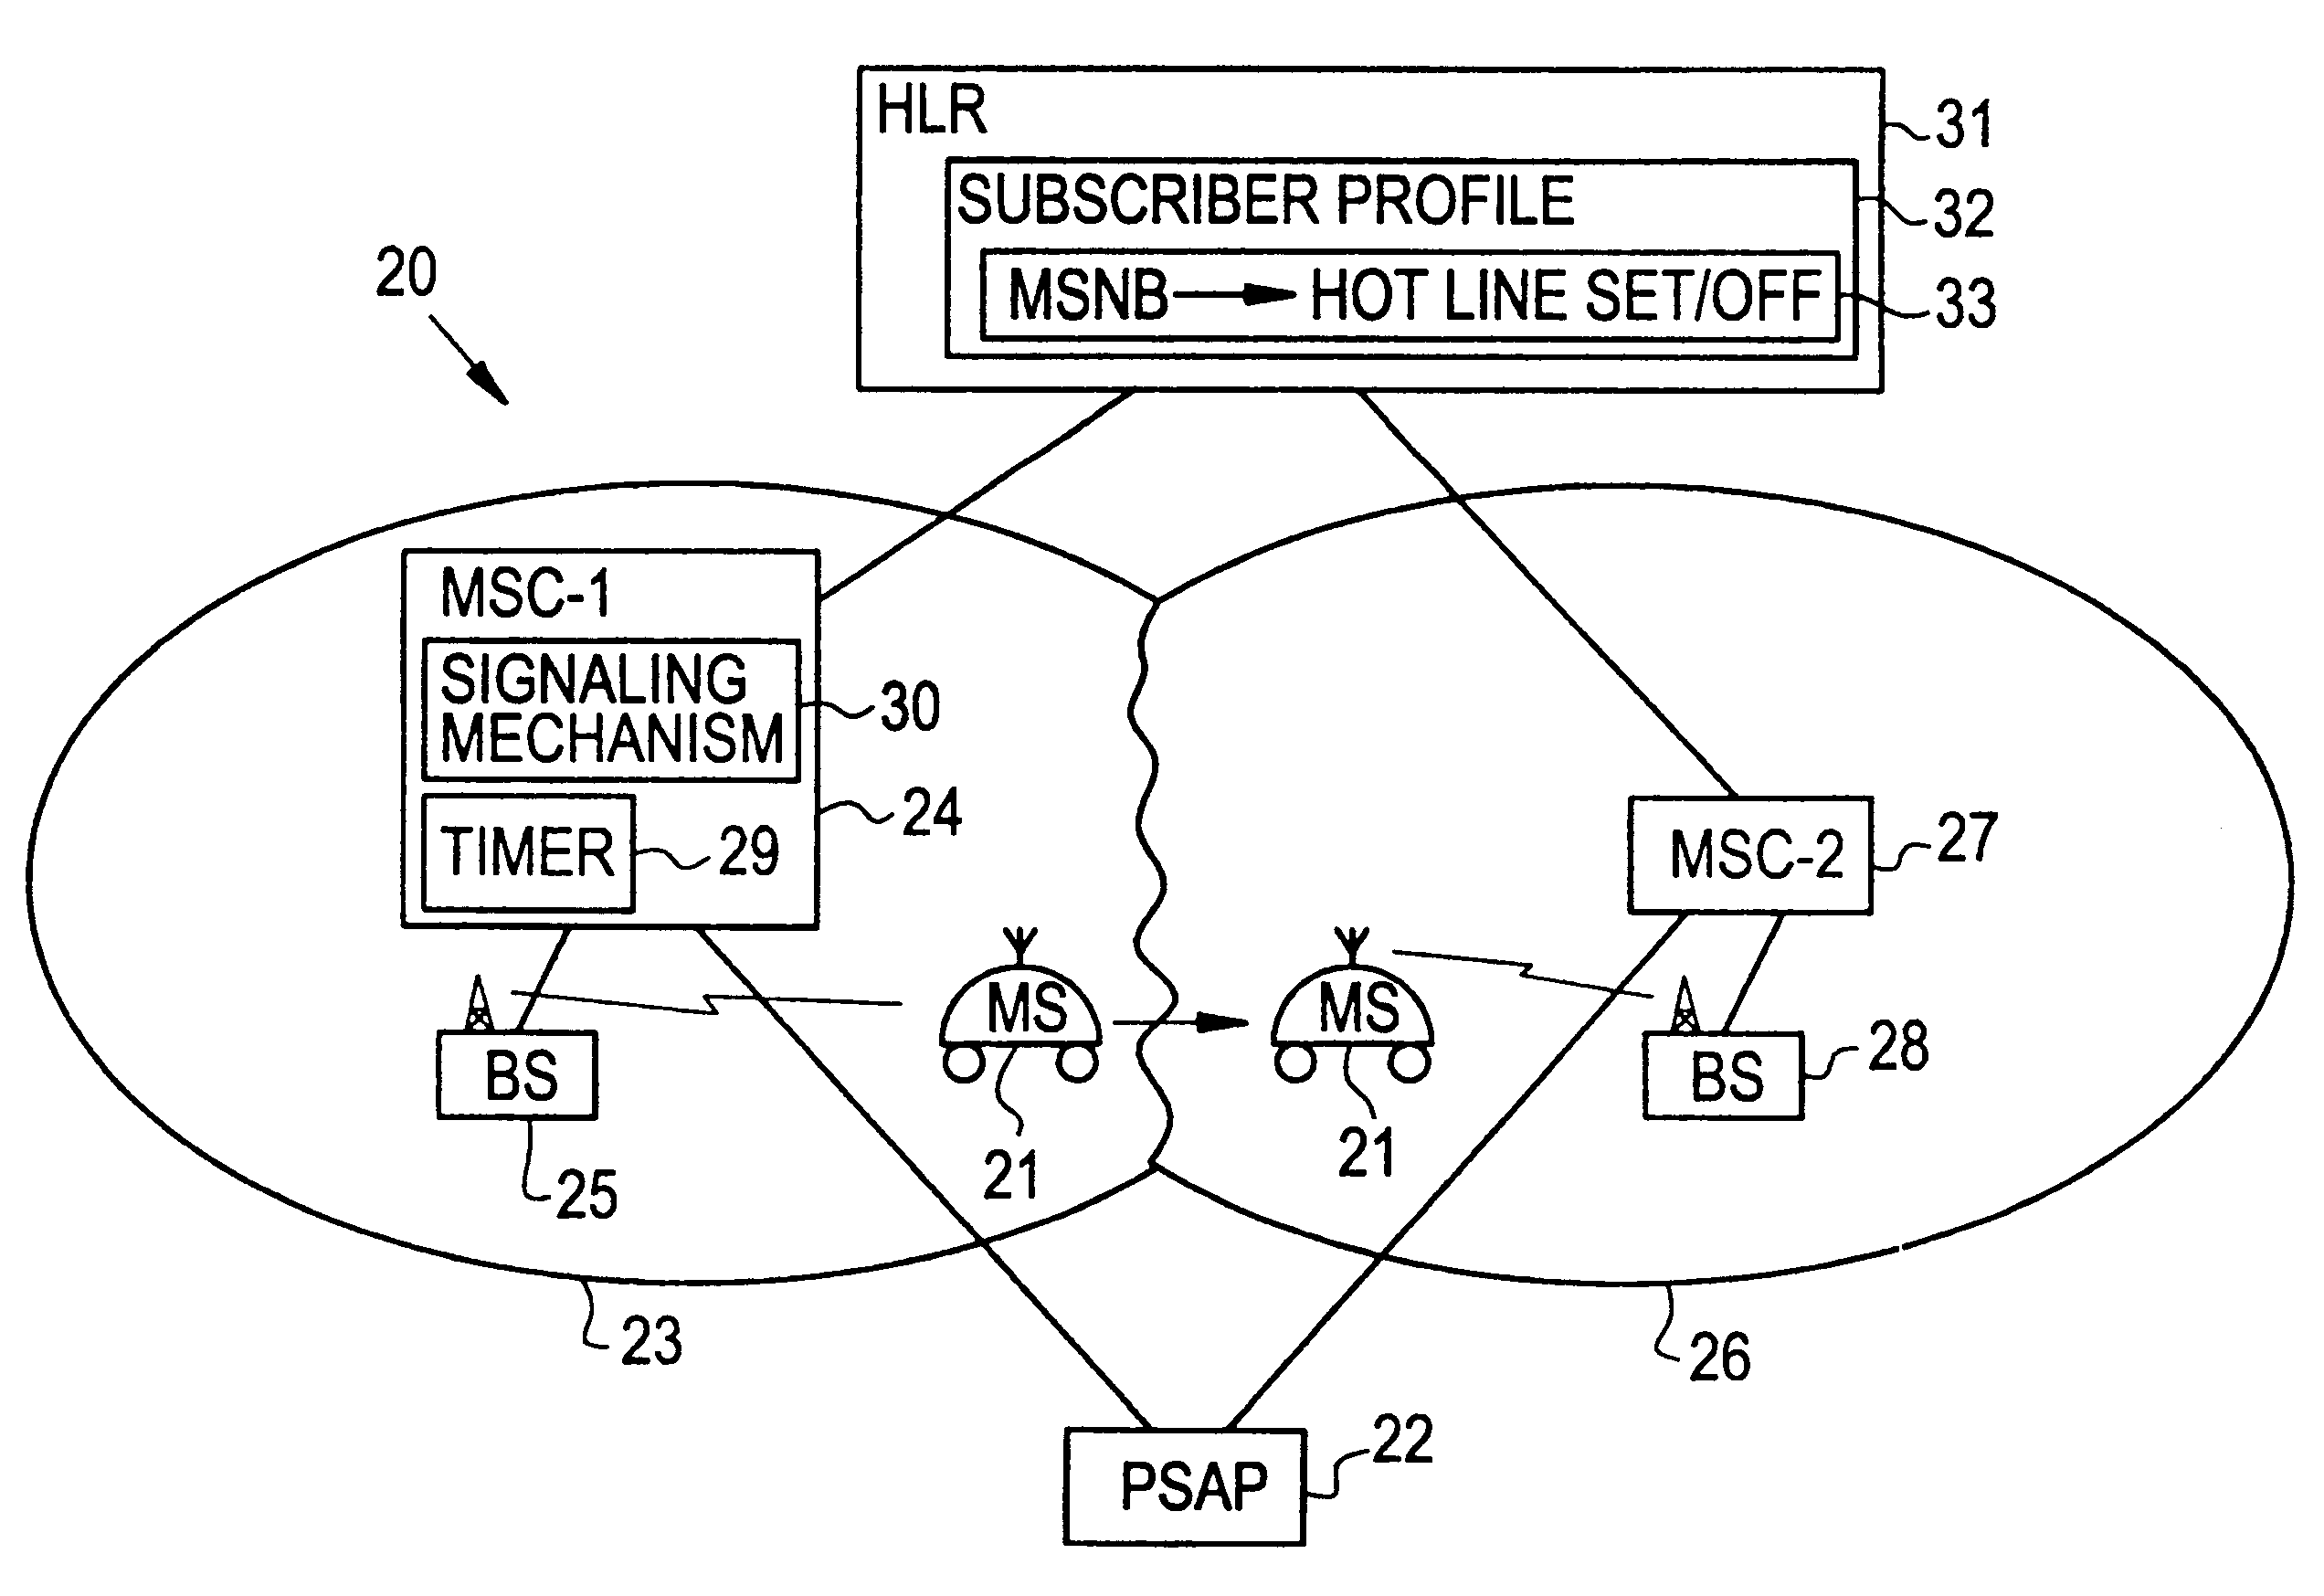 System and method of handling emergency calls from roaming mobile stations in a radio telecommunications network